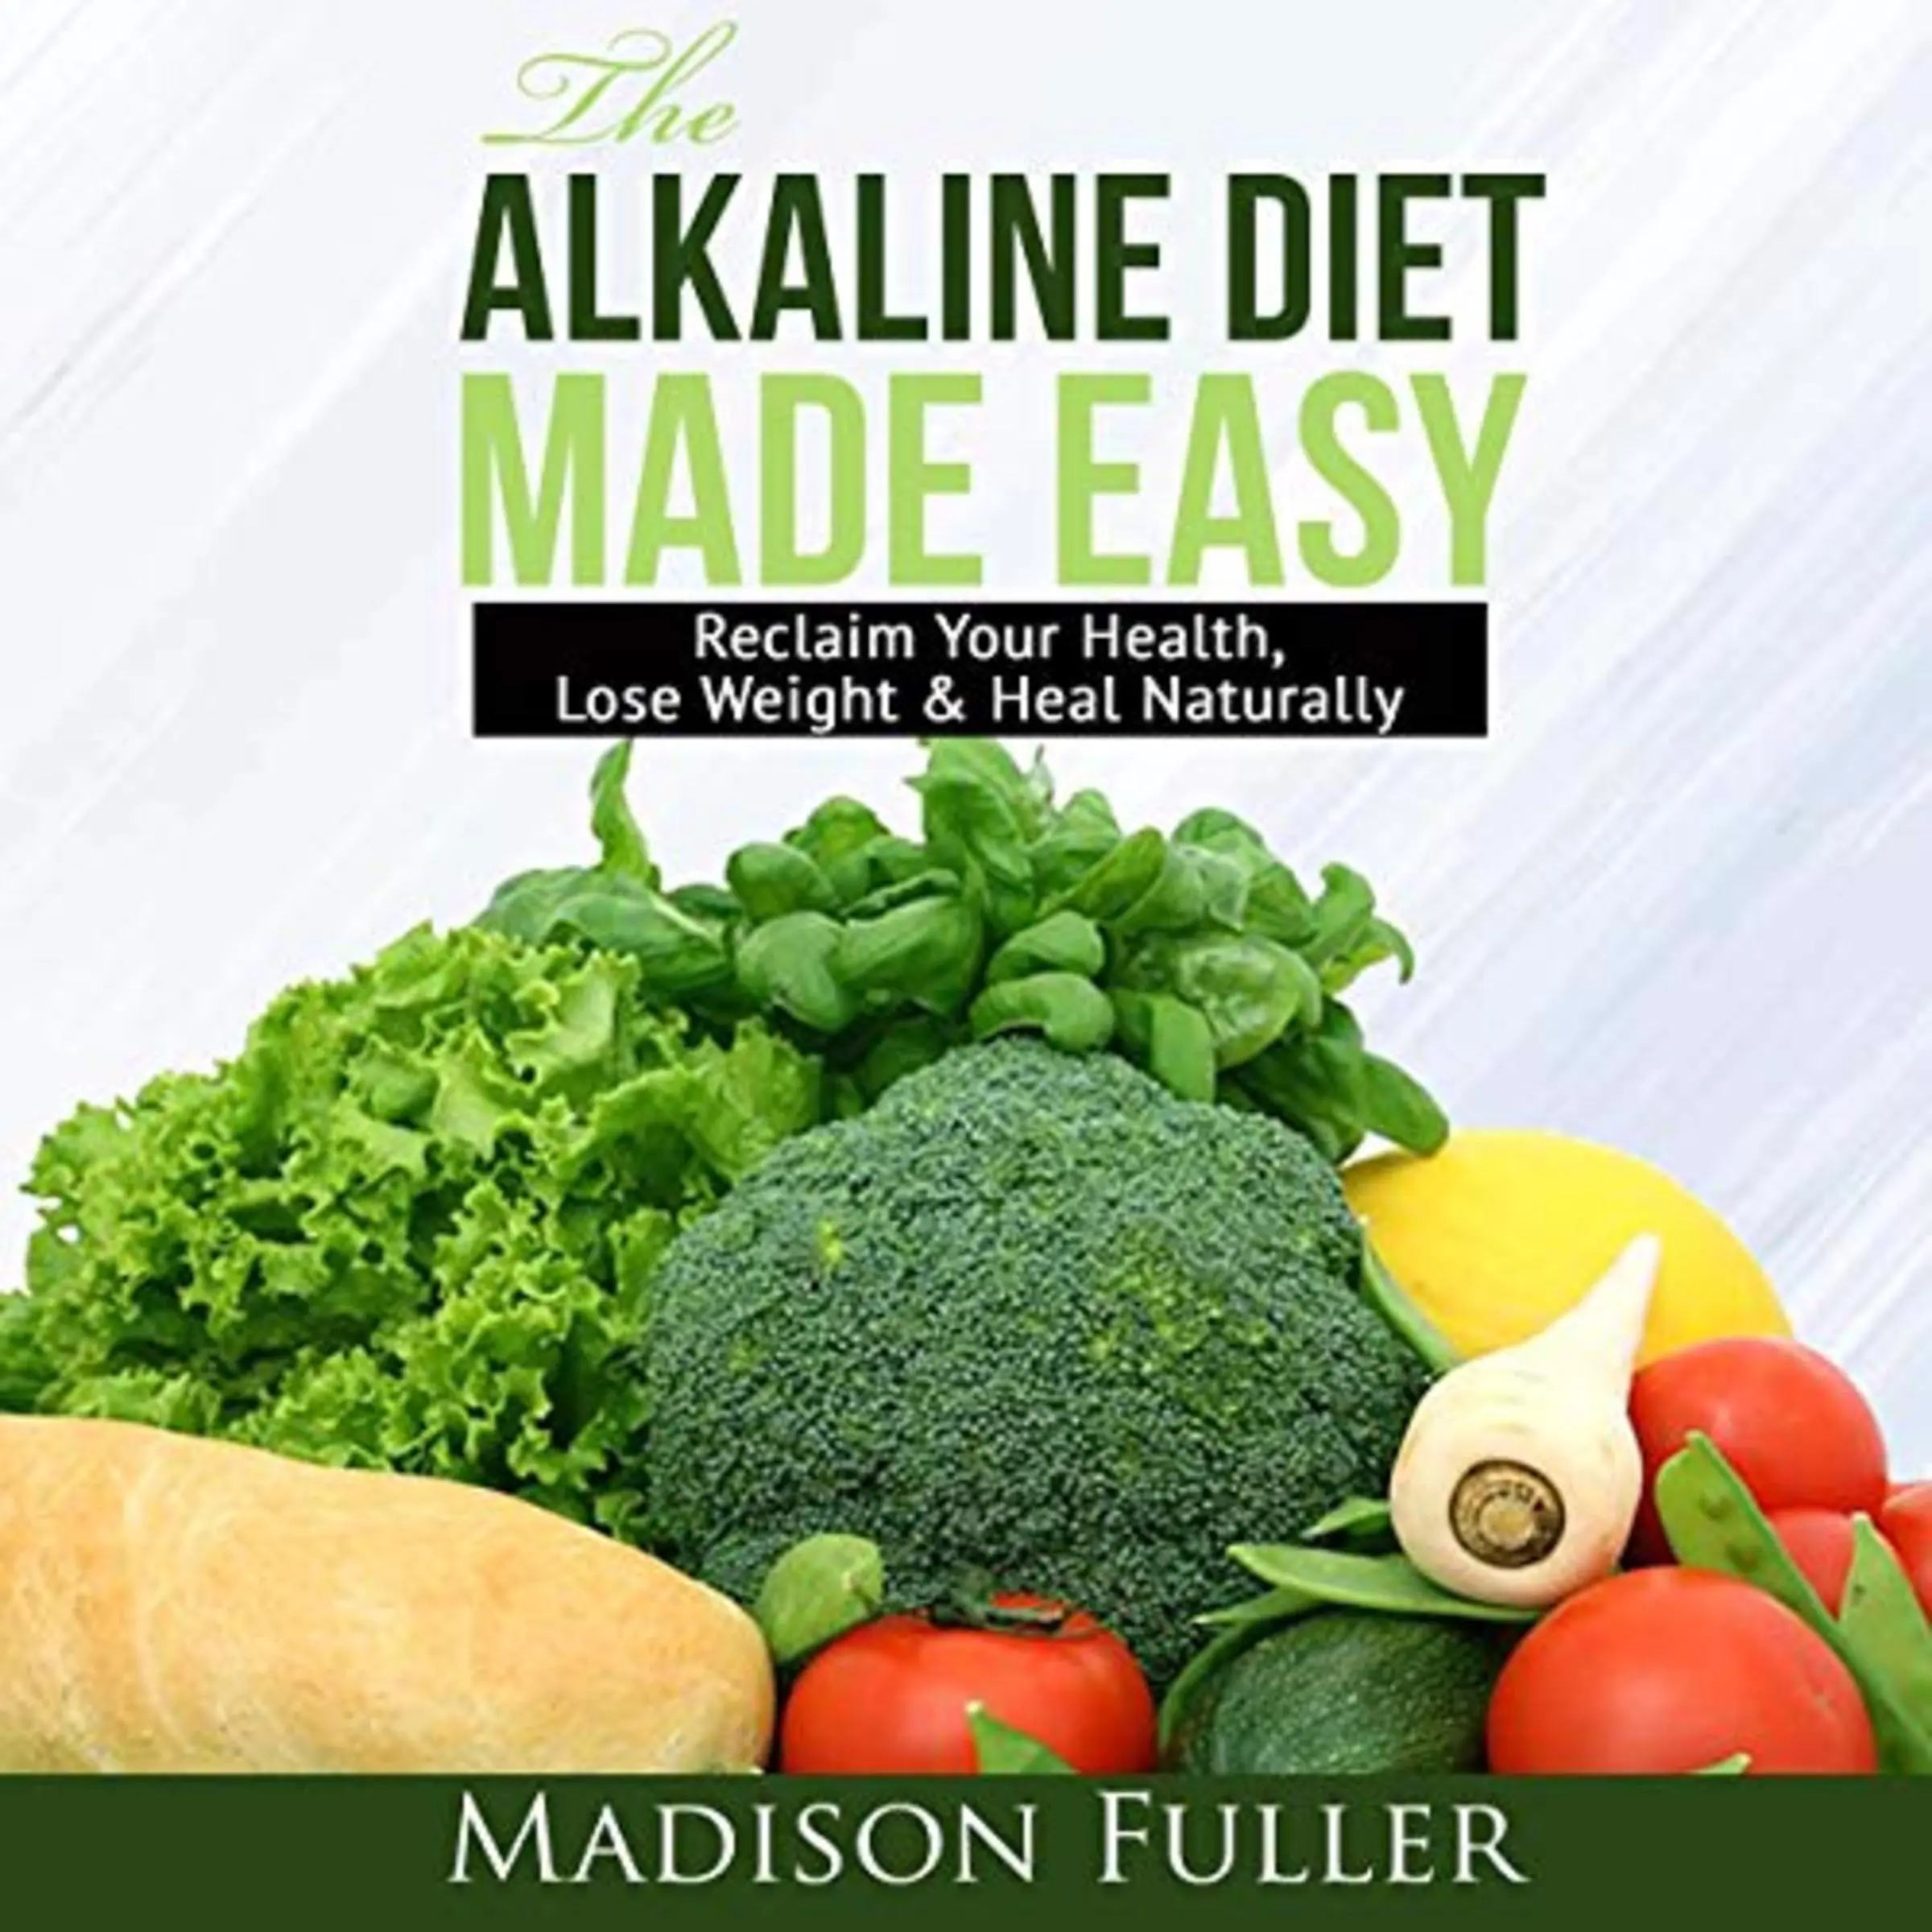 The Alkaline Diet Made Easy: Reclaim Your Health, Lose Weight & Heal Naturally Audiobook by Madison Fuller